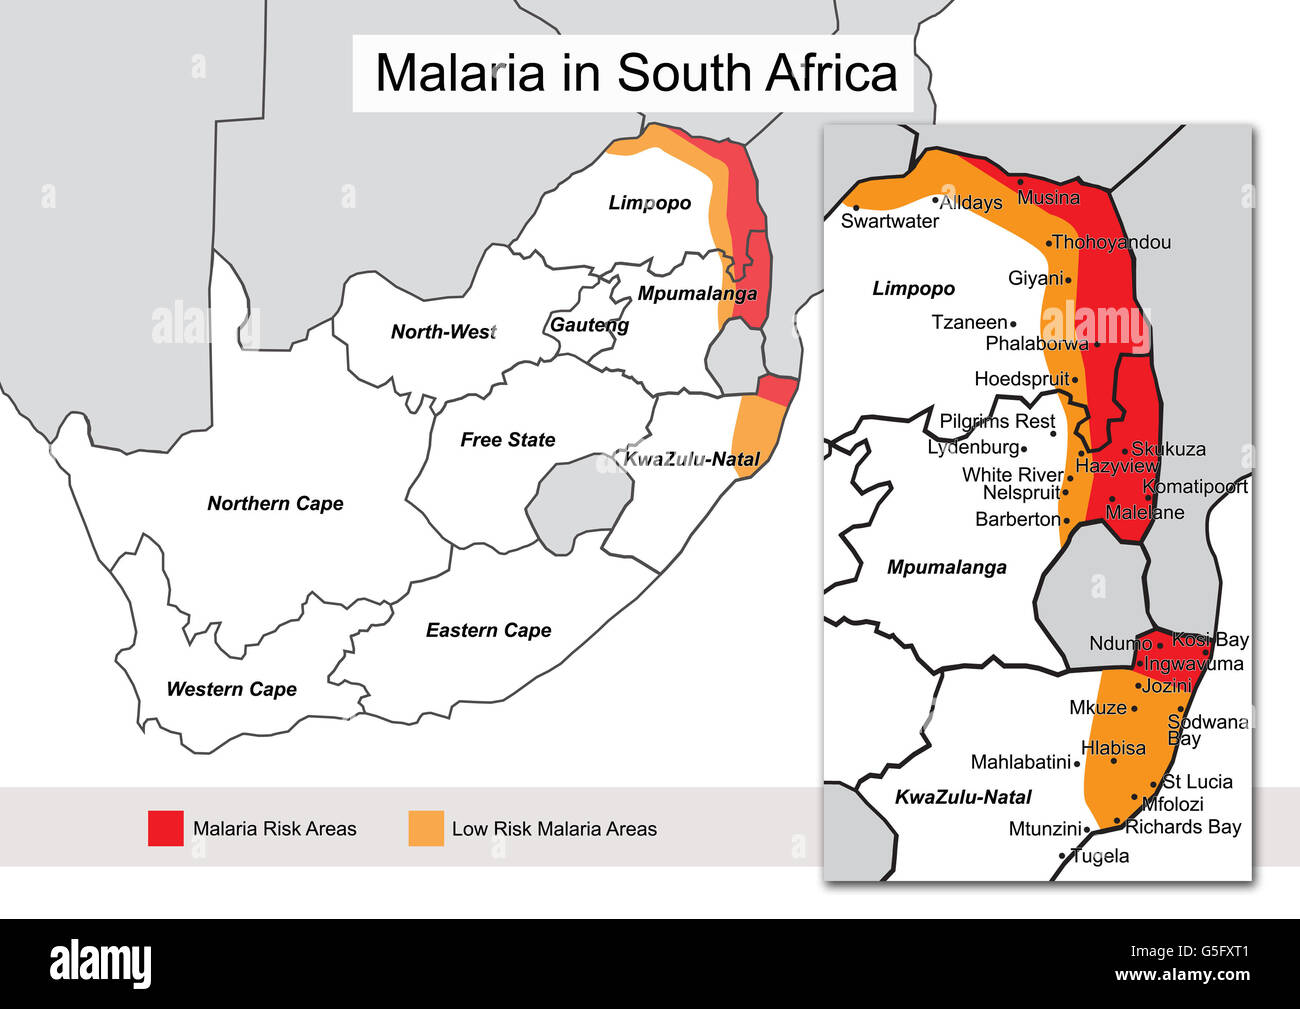 fit for travel south africa malaria map